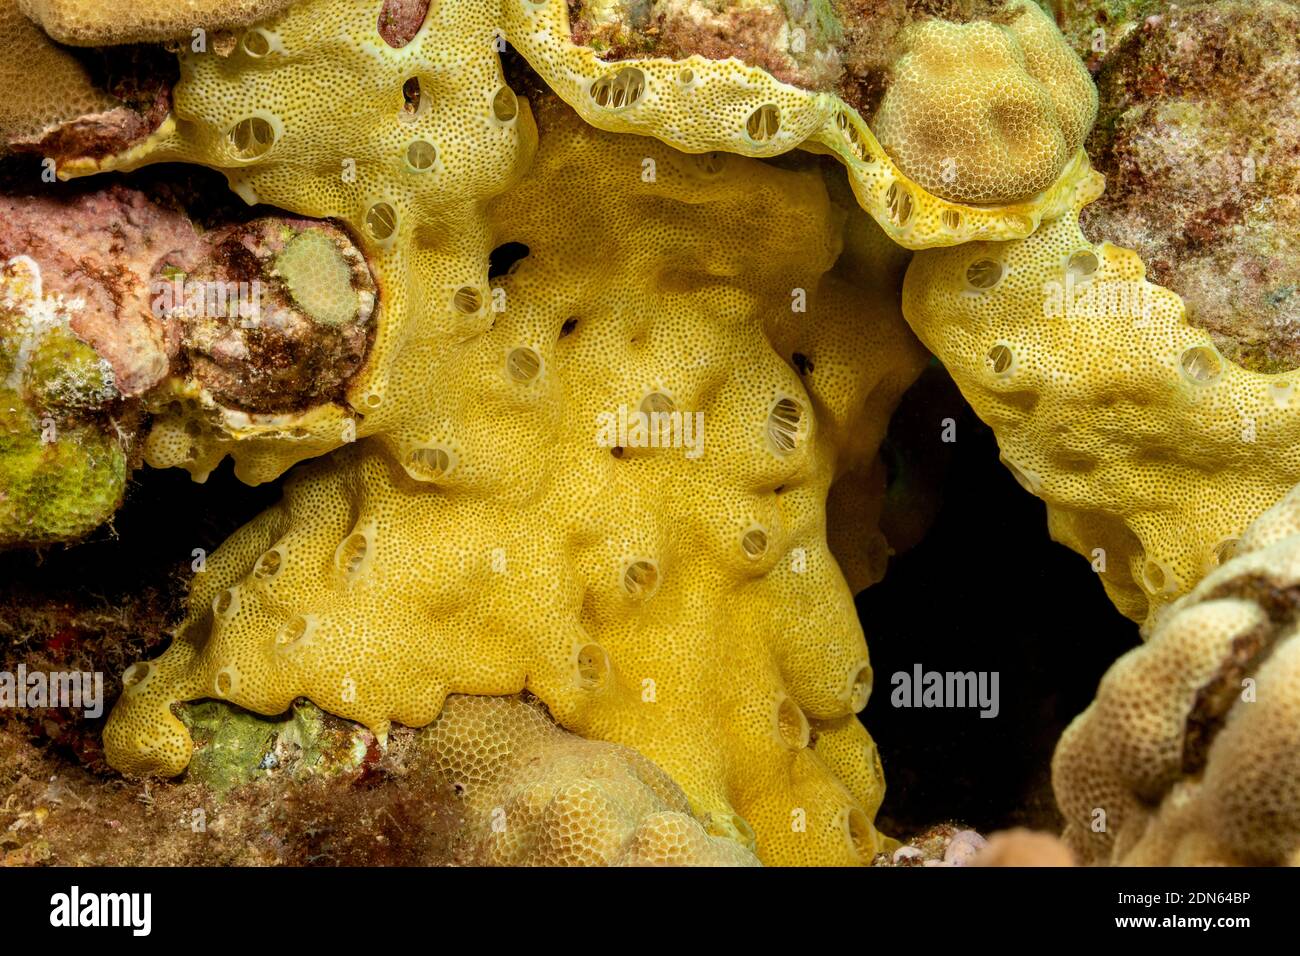 This colony of didemnid tunicates, Didemnum sp., filter the passing sea water for nutrients,  Hawaii. This is often mistaken for an encrusting sponge. Stock Photo